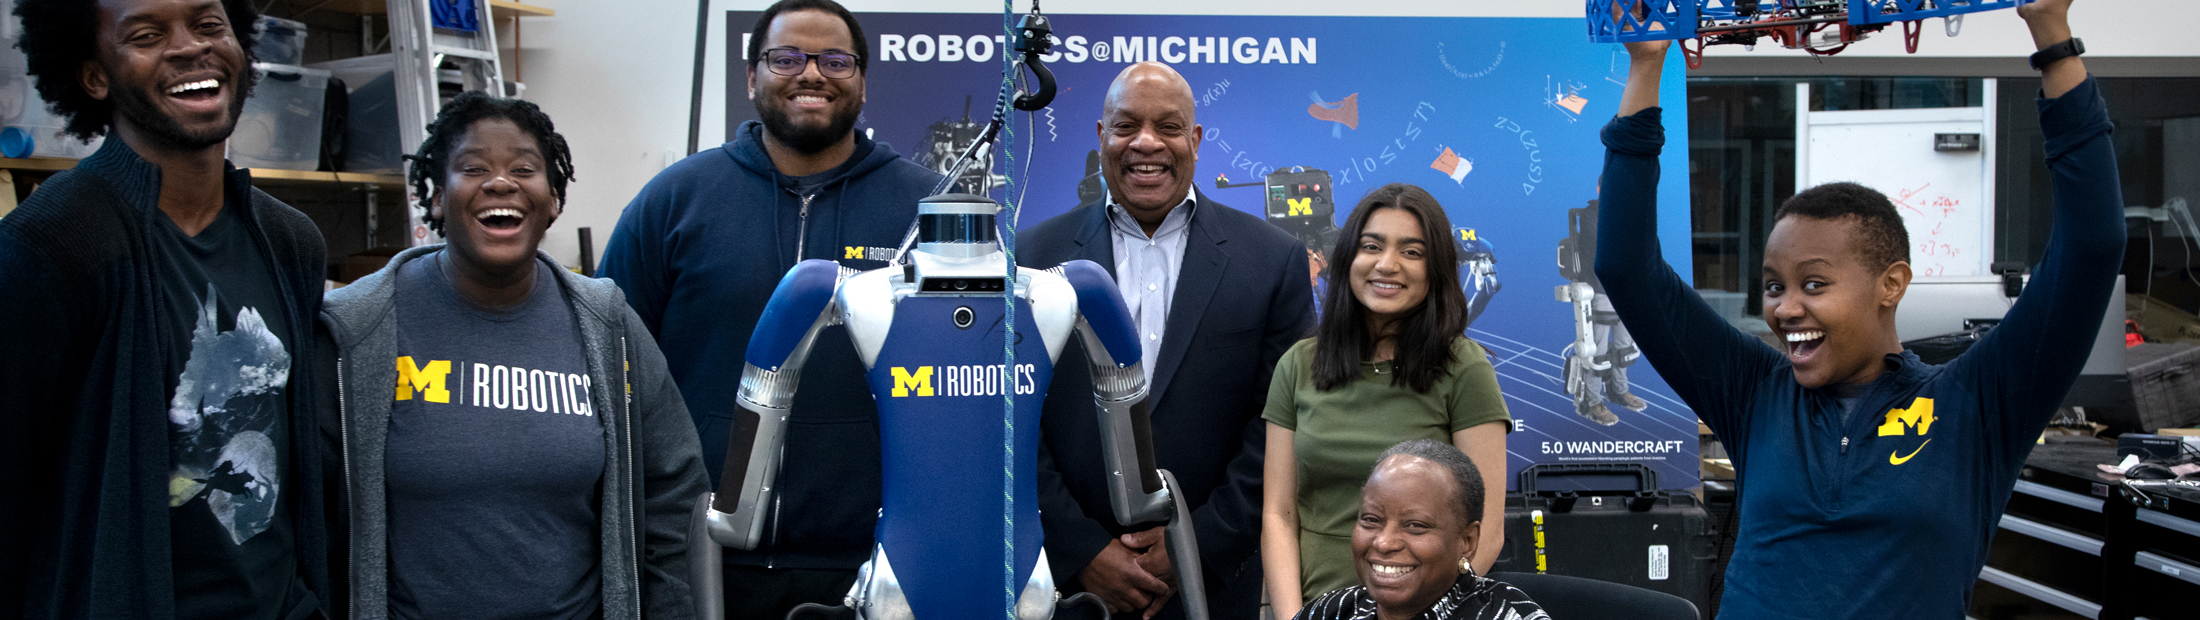 The McNeils in a robotics lab with graduate students posing together